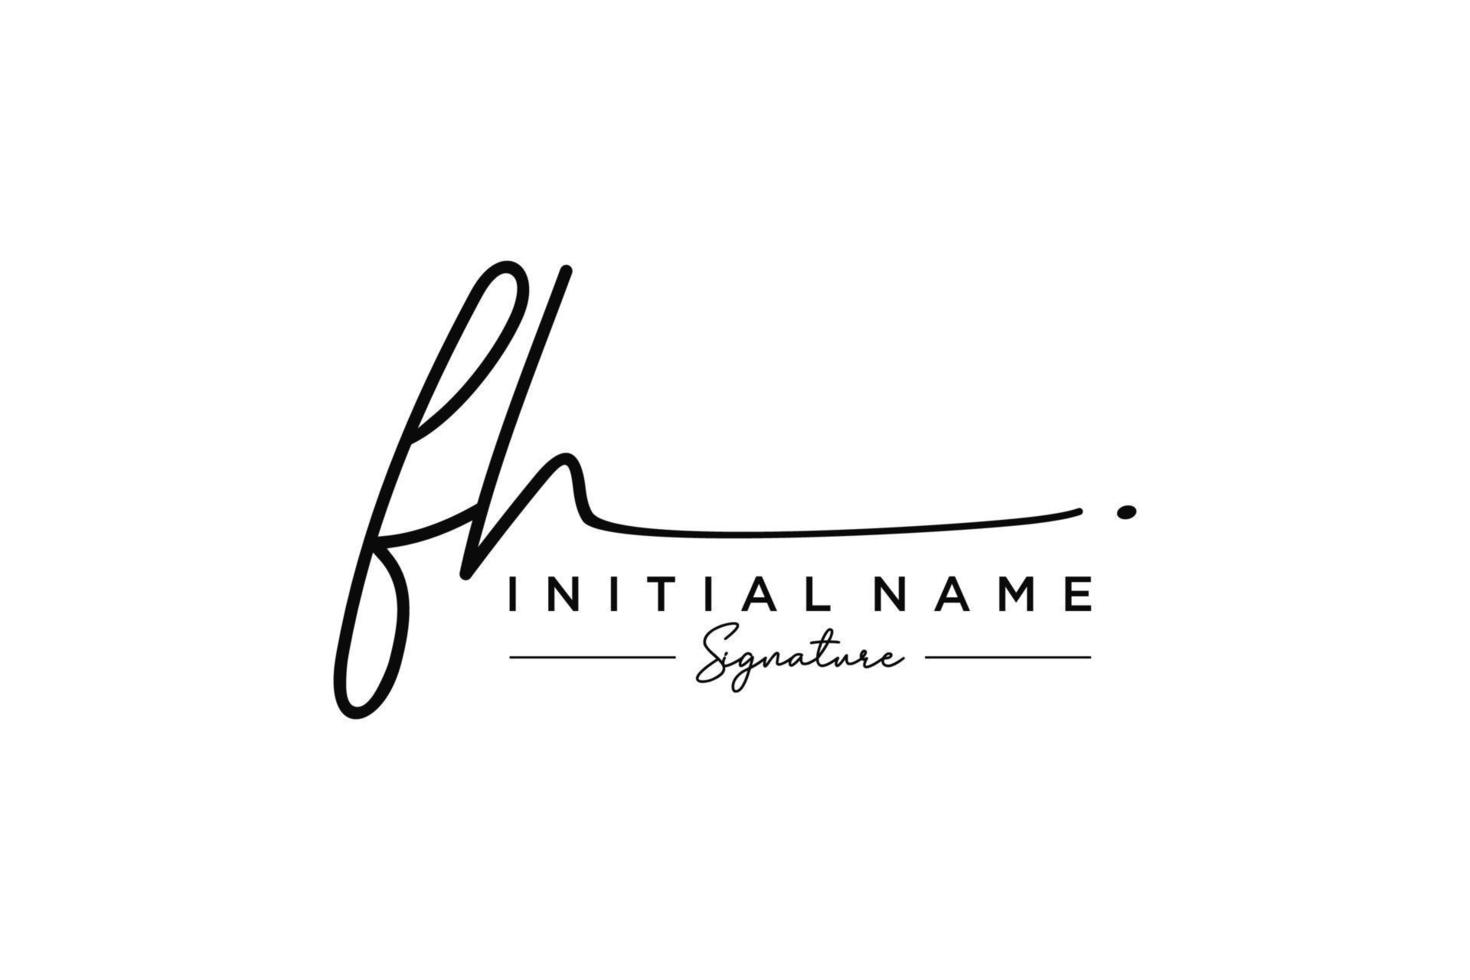 Initial FH signature logo template vector. Hand drawn Calligraphy lettering Vector illustration.